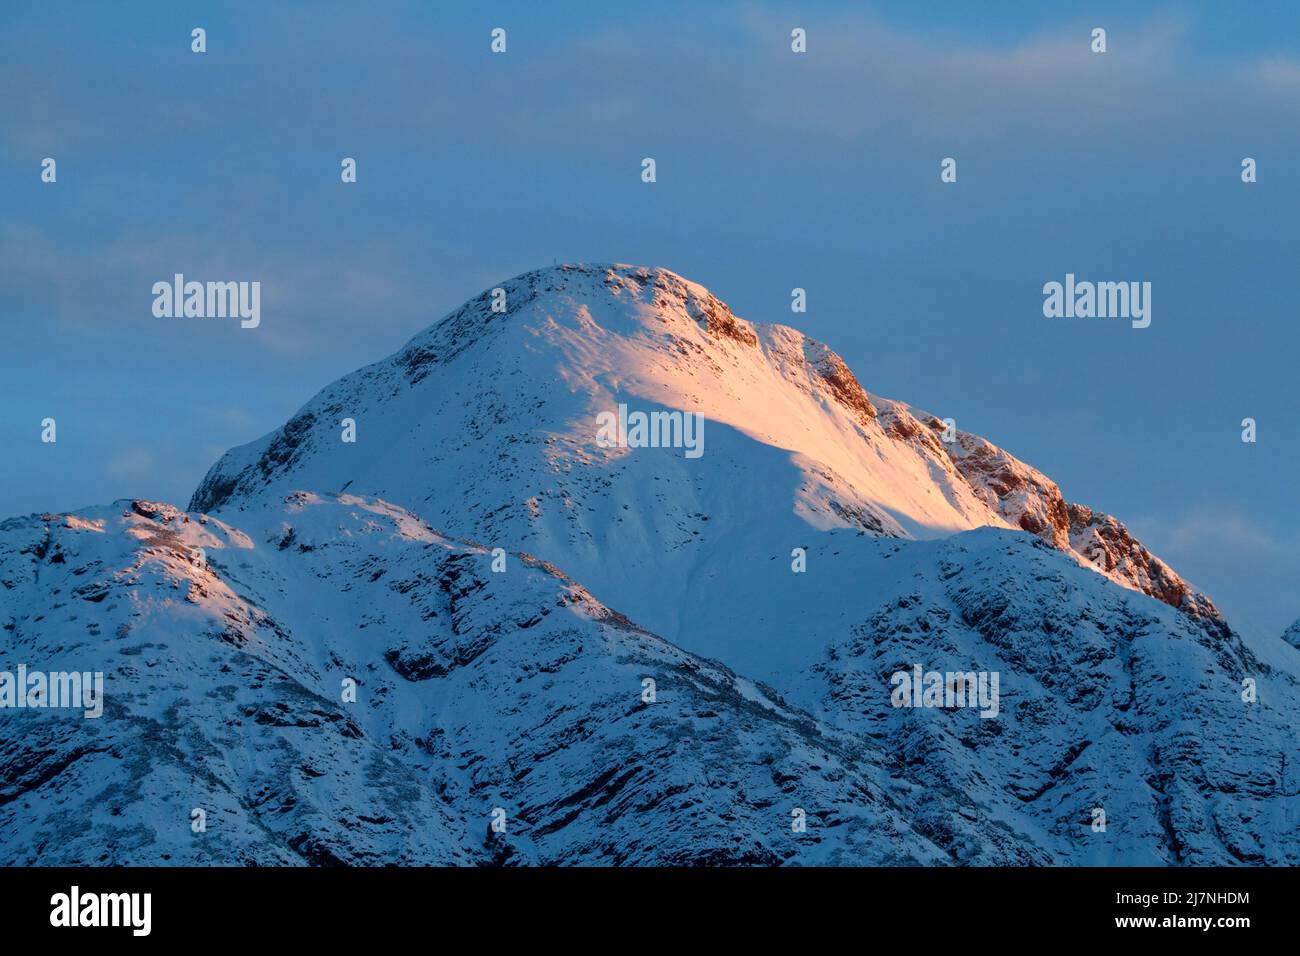 Fantastic evening winter landscape with a colorful snowy mountain peak in Austria Stock Photo